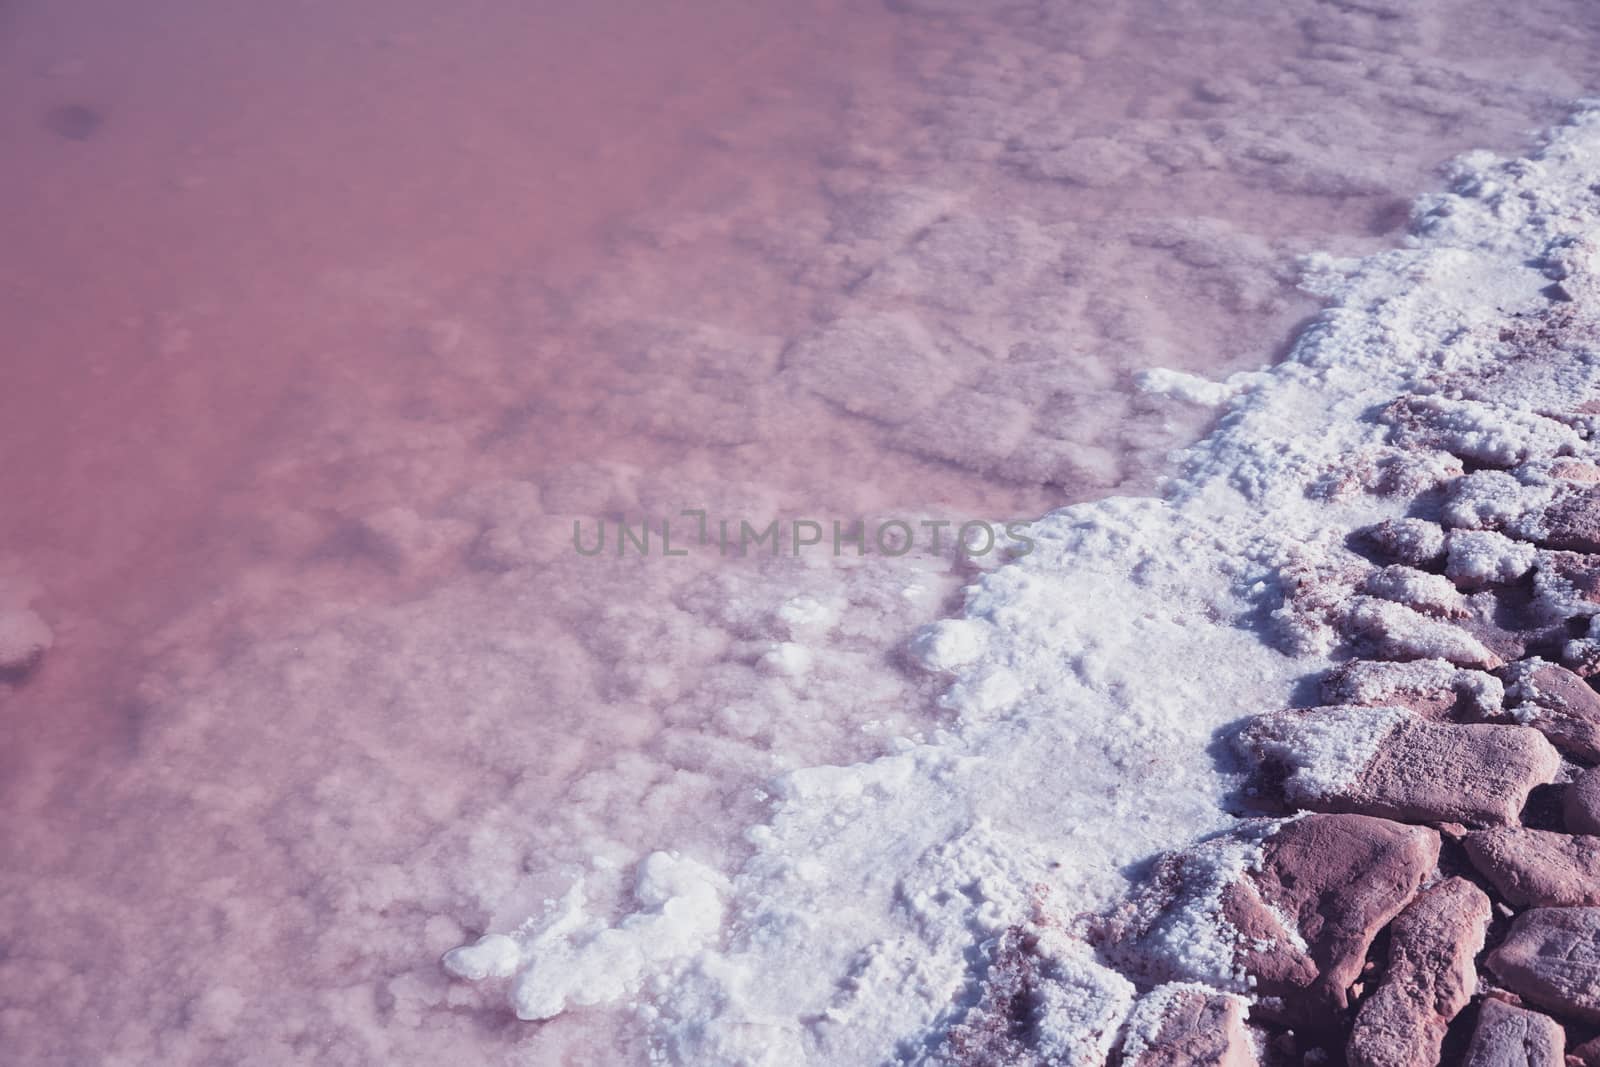 Textured of different shapes of rocks of salt in a pink water basin.